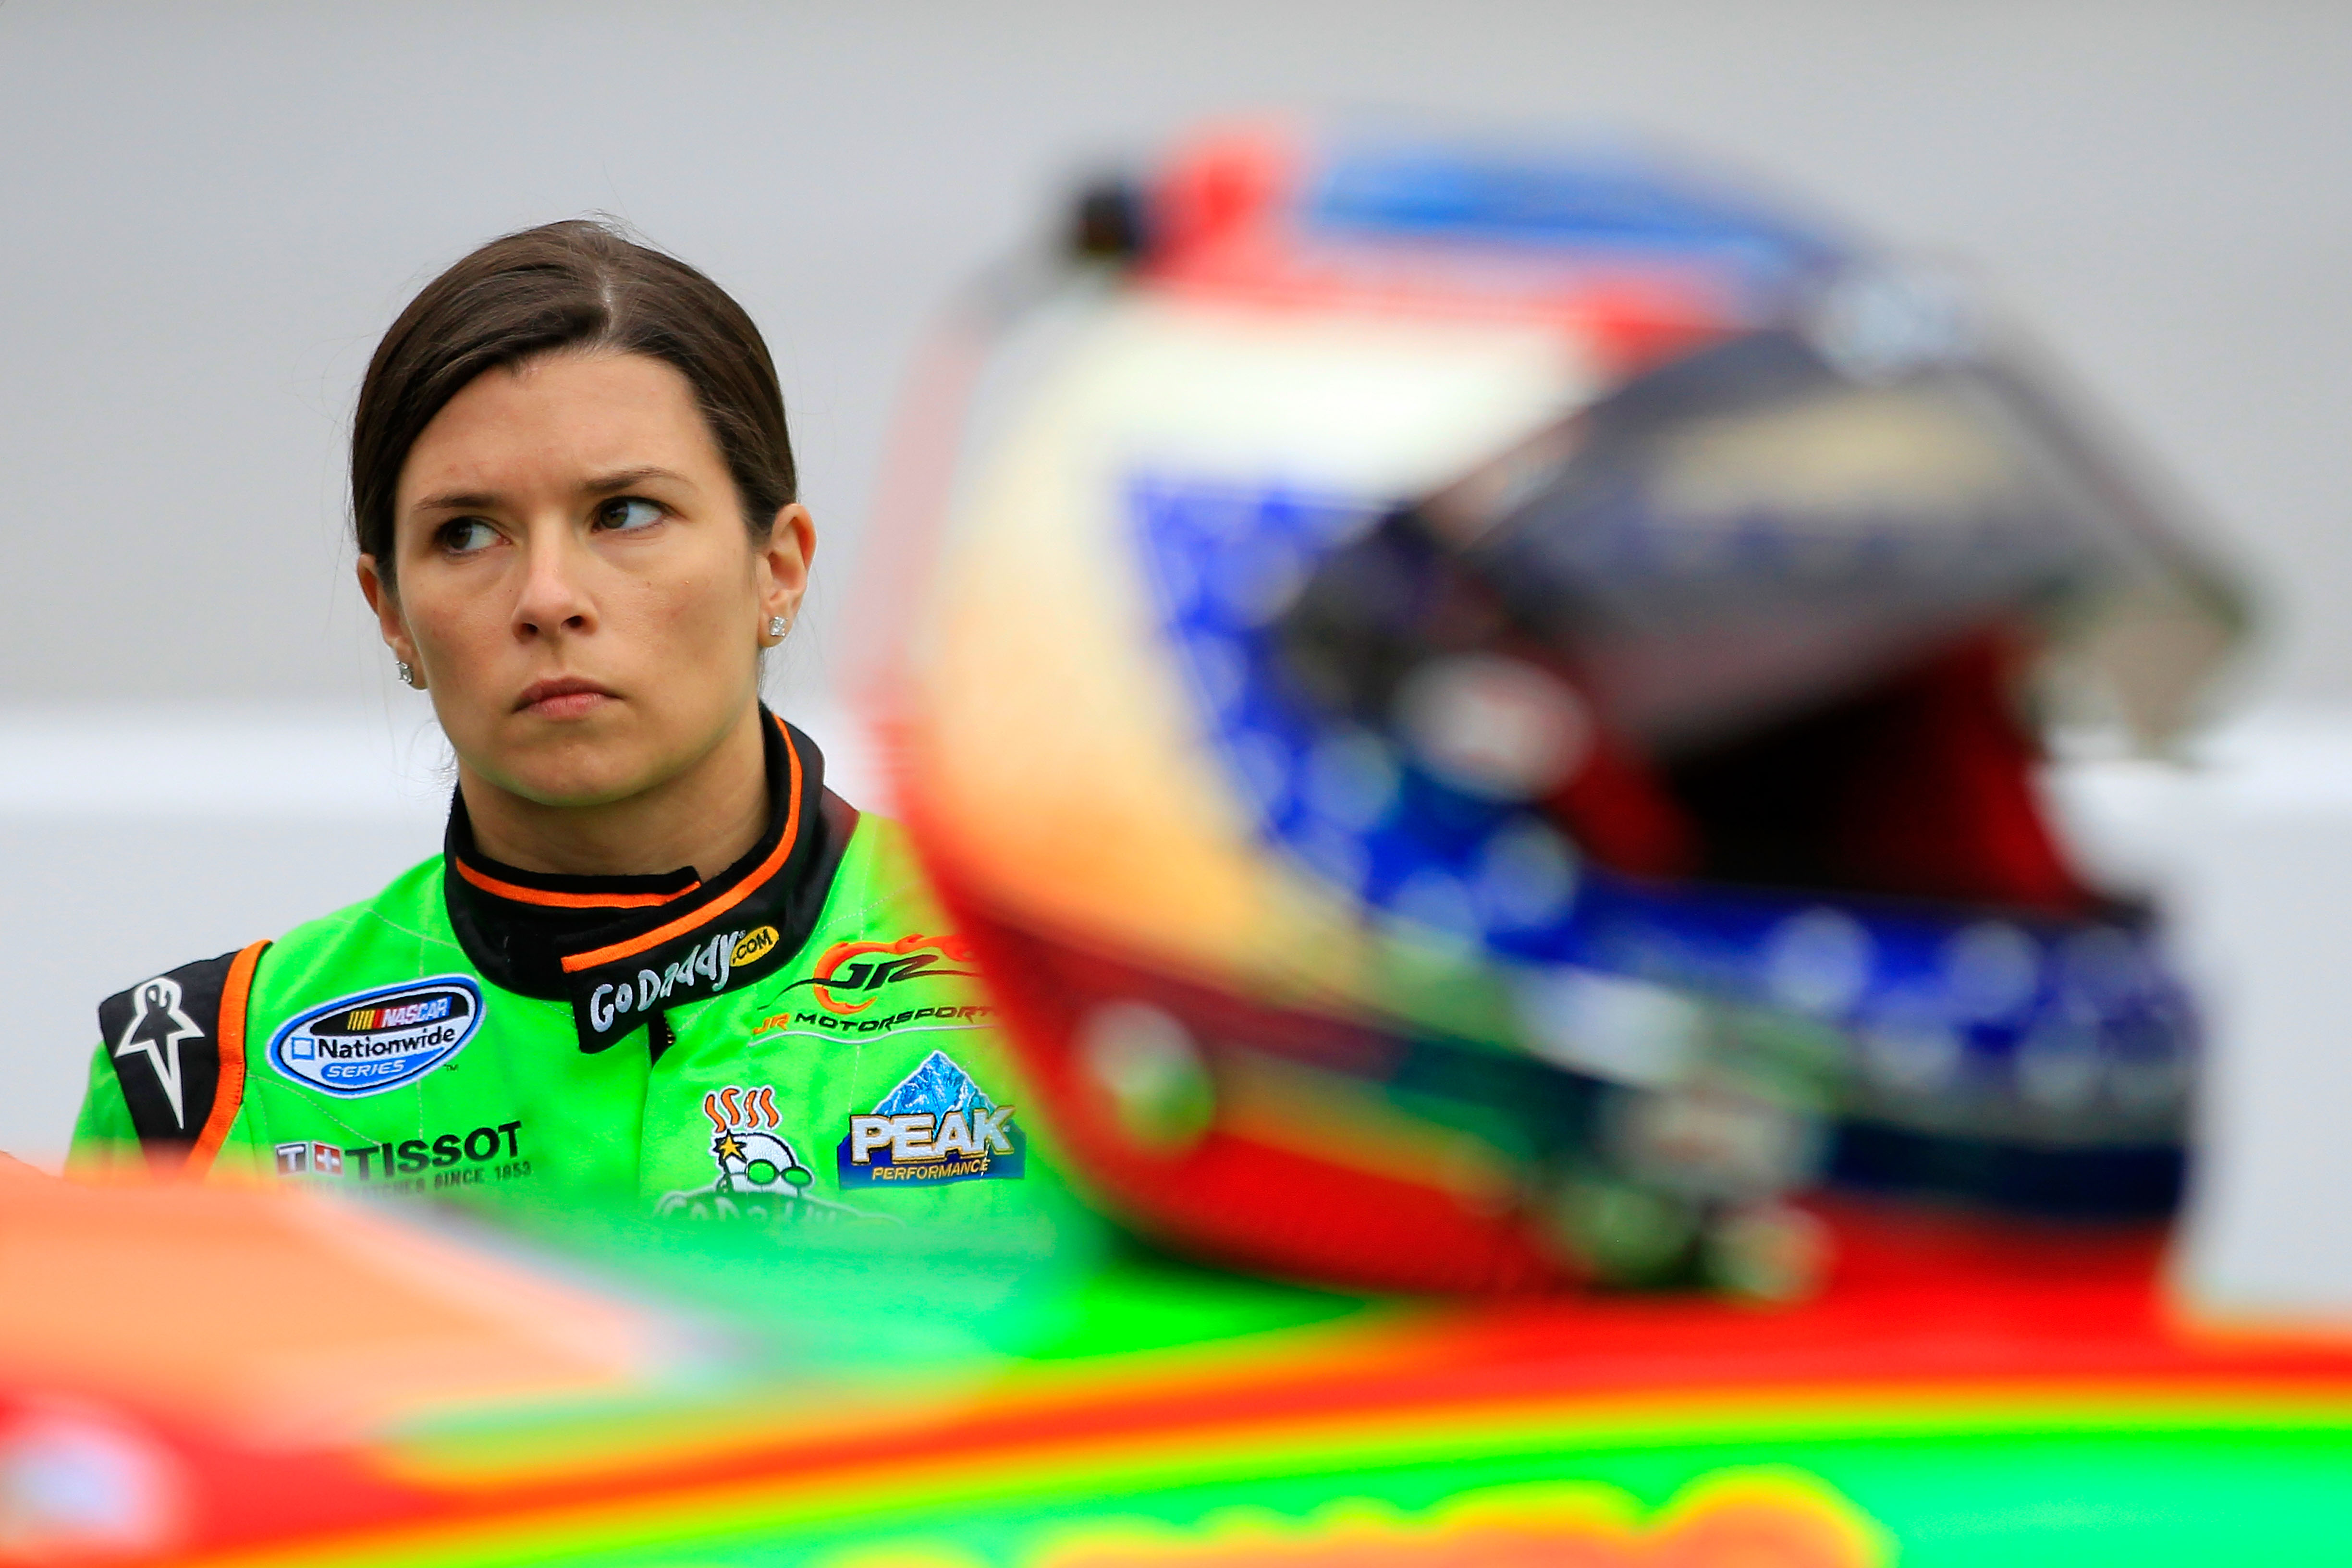 BRISTOL, TN - MARCH 18:  Danica Patrick, driver of the #7 GoDaddy.com Chevrolet, stands in the garage area during practice for the NASCAR Nationwide Series Scotts EZ Seed 300 at Bristol Motor Speedway on March 18, 2011 in Bristol, Tennessee.  (Photo by Ch